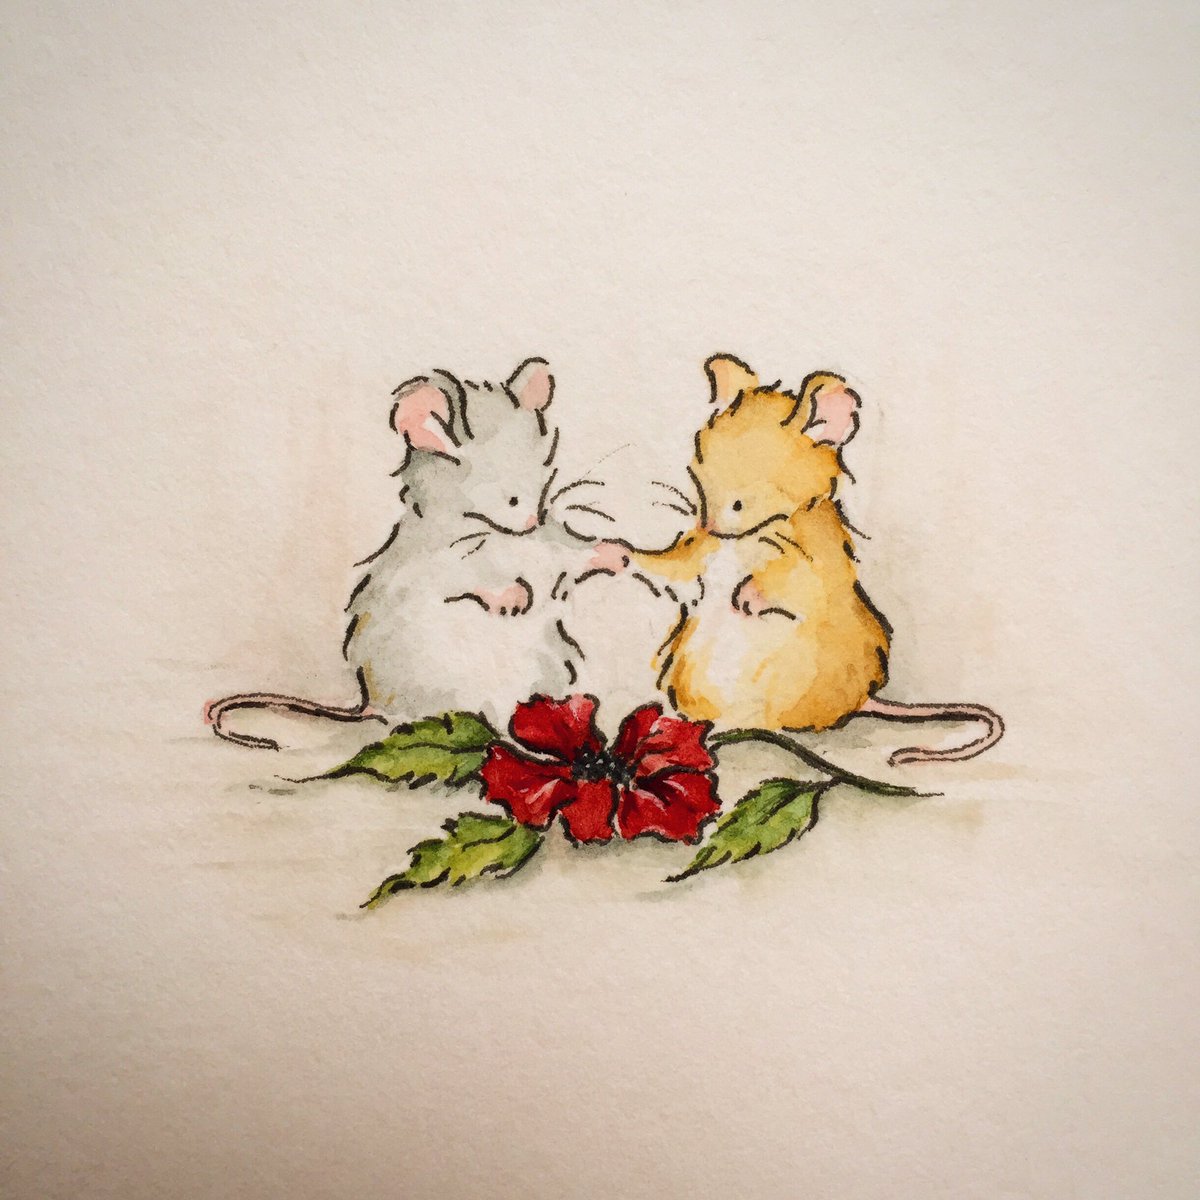 Remembering all those who fought against oppression on this day June 6th 1944 ❤️🐭 #dday #dday75 #morrismouse